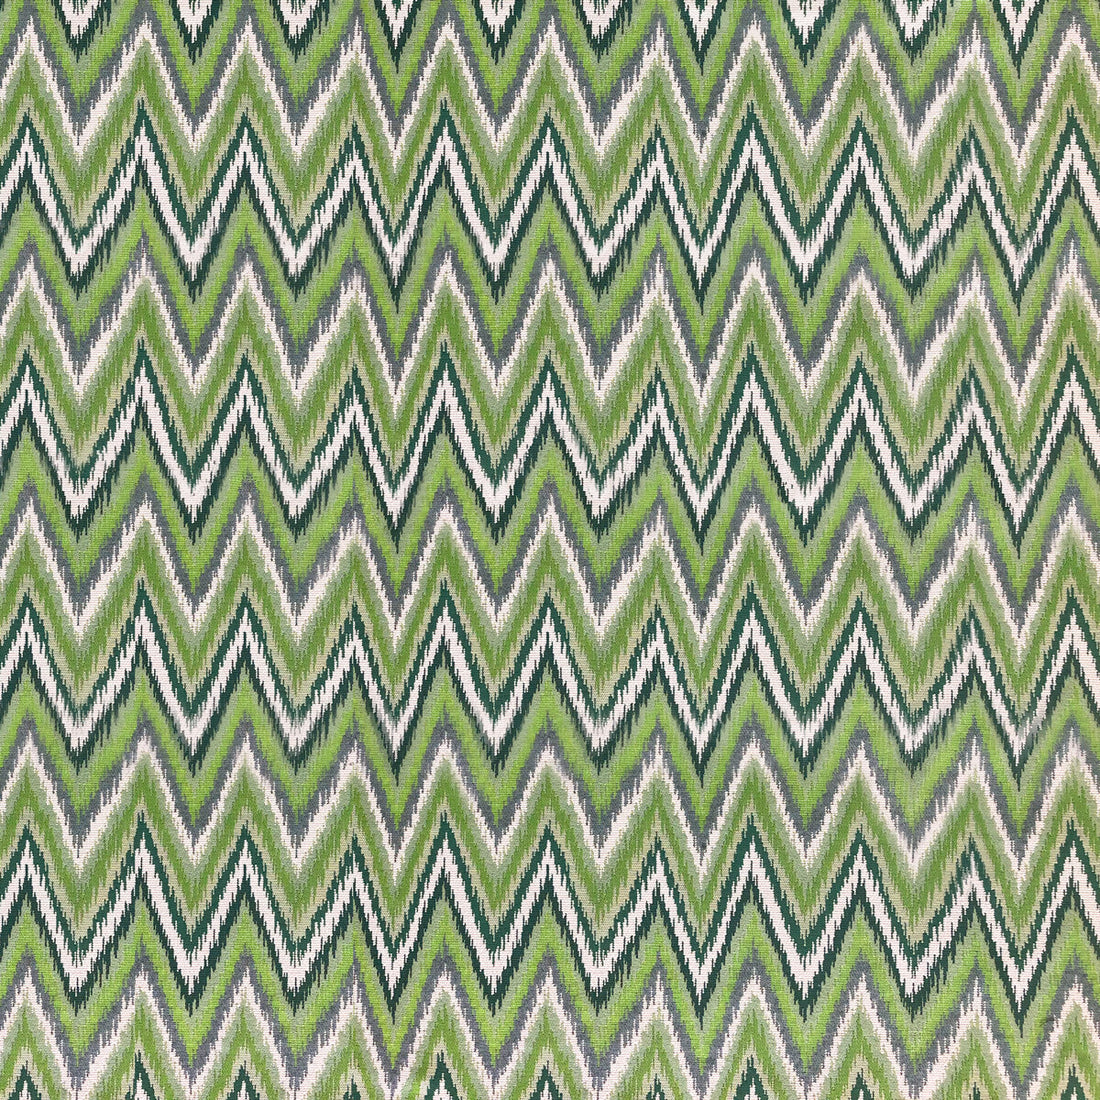 Gedeon fabric in verde/azul color - pattern LCT1047.001.0 - by Gaston y Daniela in the Lorenzo Castillo VI collection